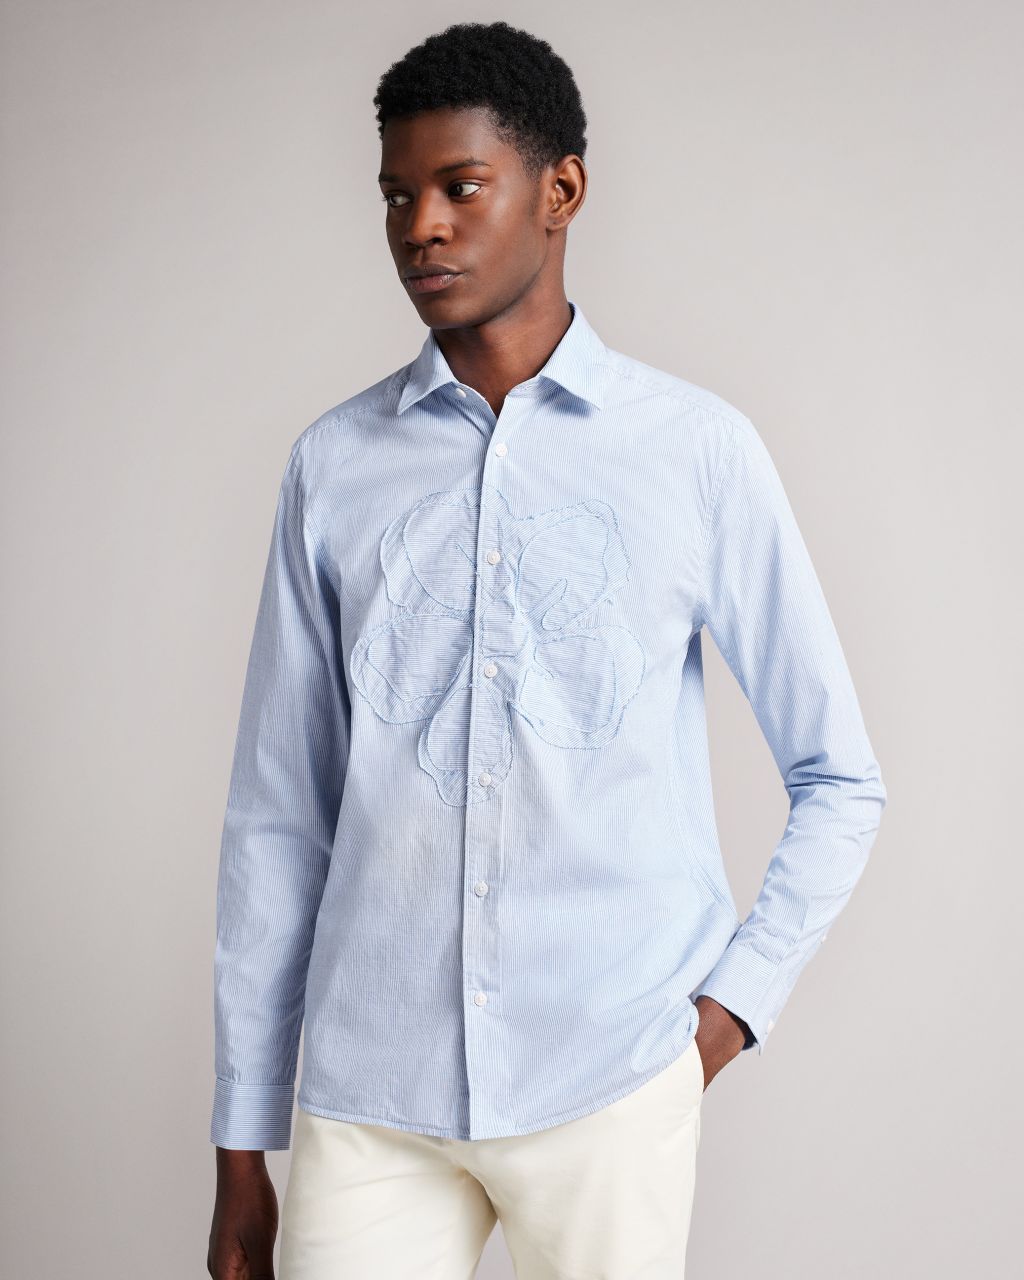 Ted Baker Men's Long Sleeve Striped Shirt With Magnolia Detail in Blue, Evadnee, Cotton